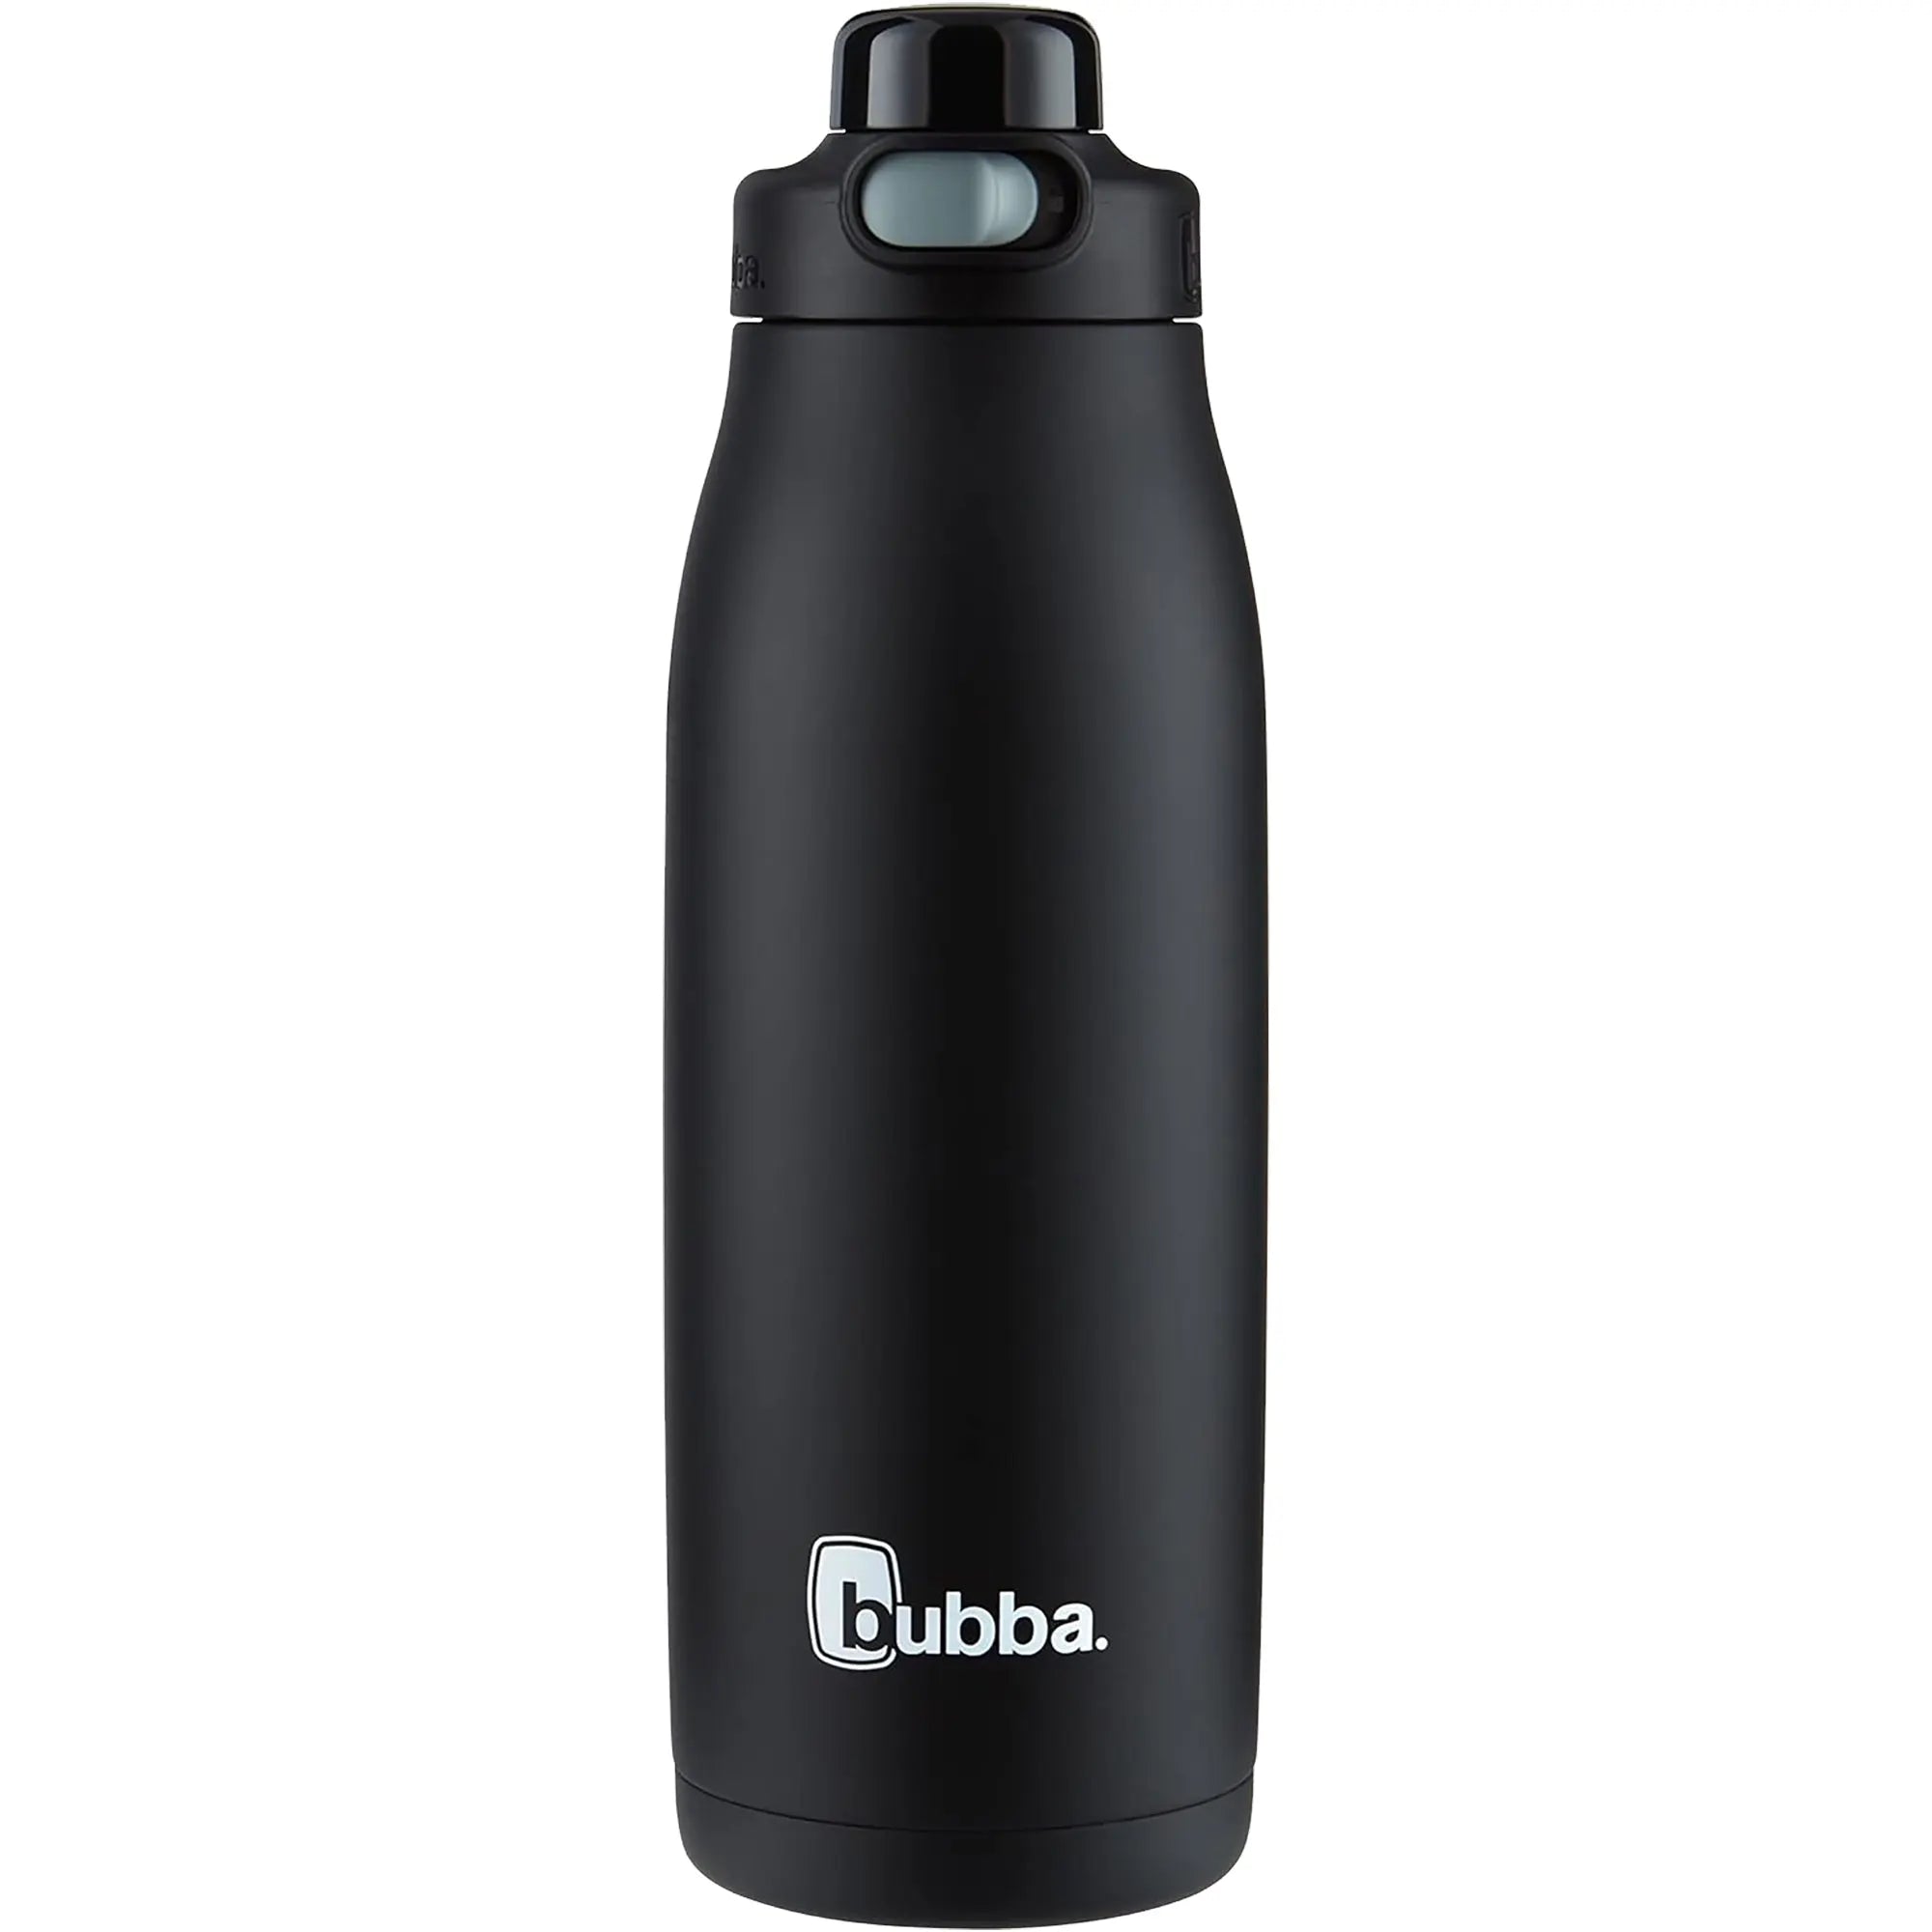 Bubba 32 oz. Radiant Vacuum Insulated Stainless Steel Rubberized Water Bottle Bubba